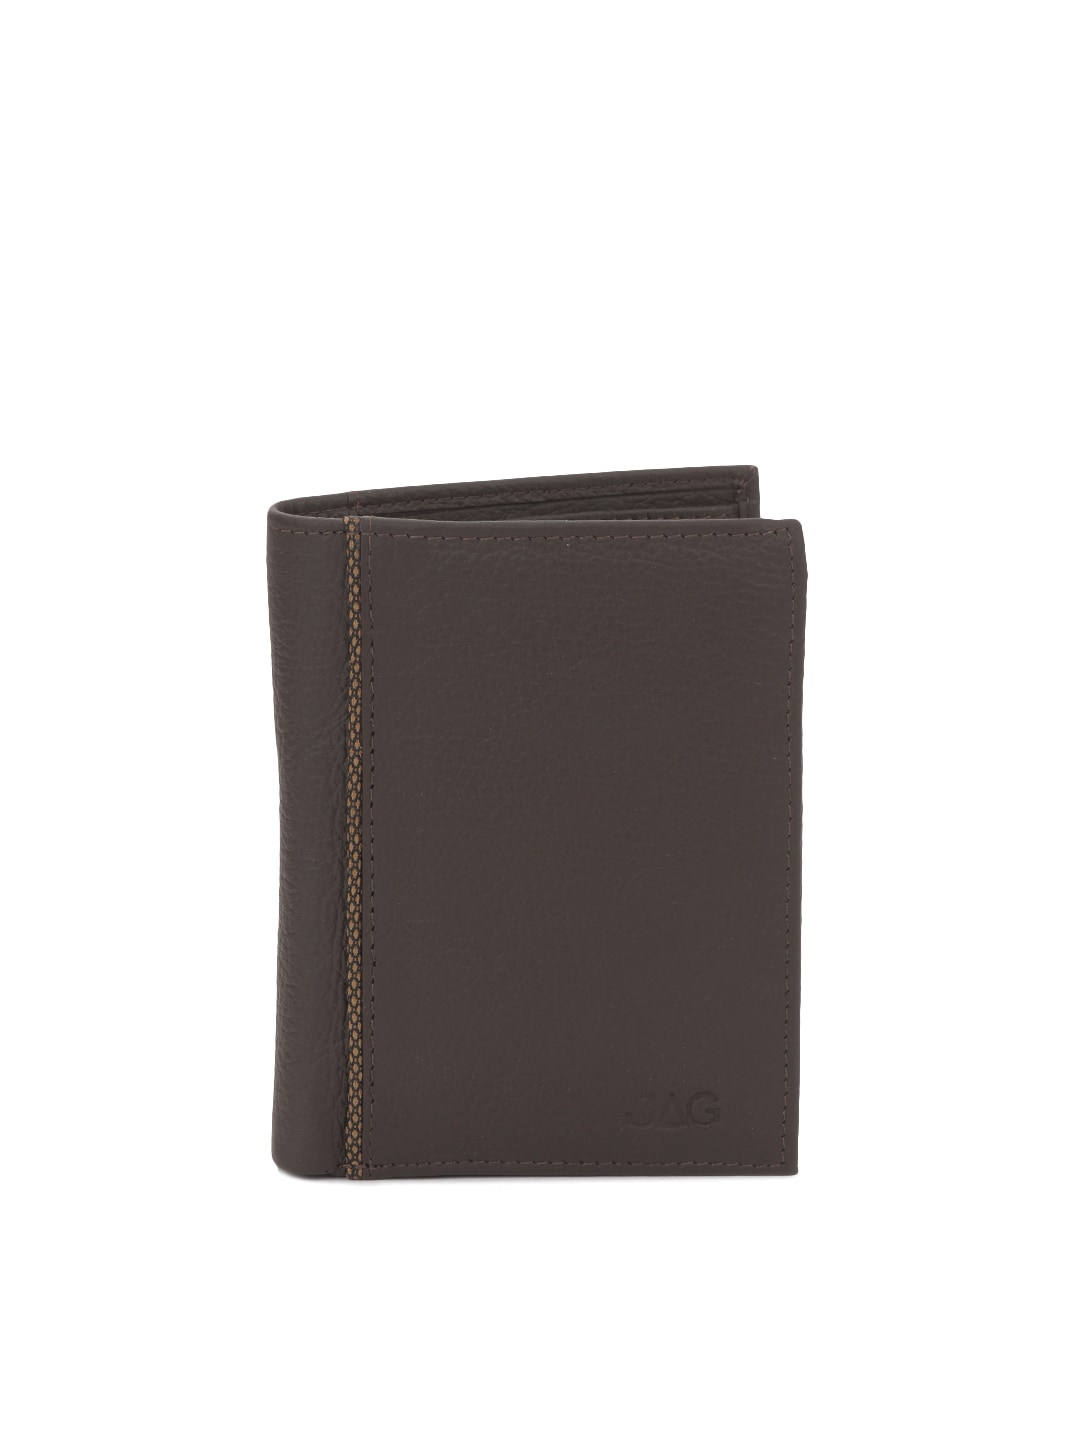 JAG Men Chocolate Brown Leather Wallet